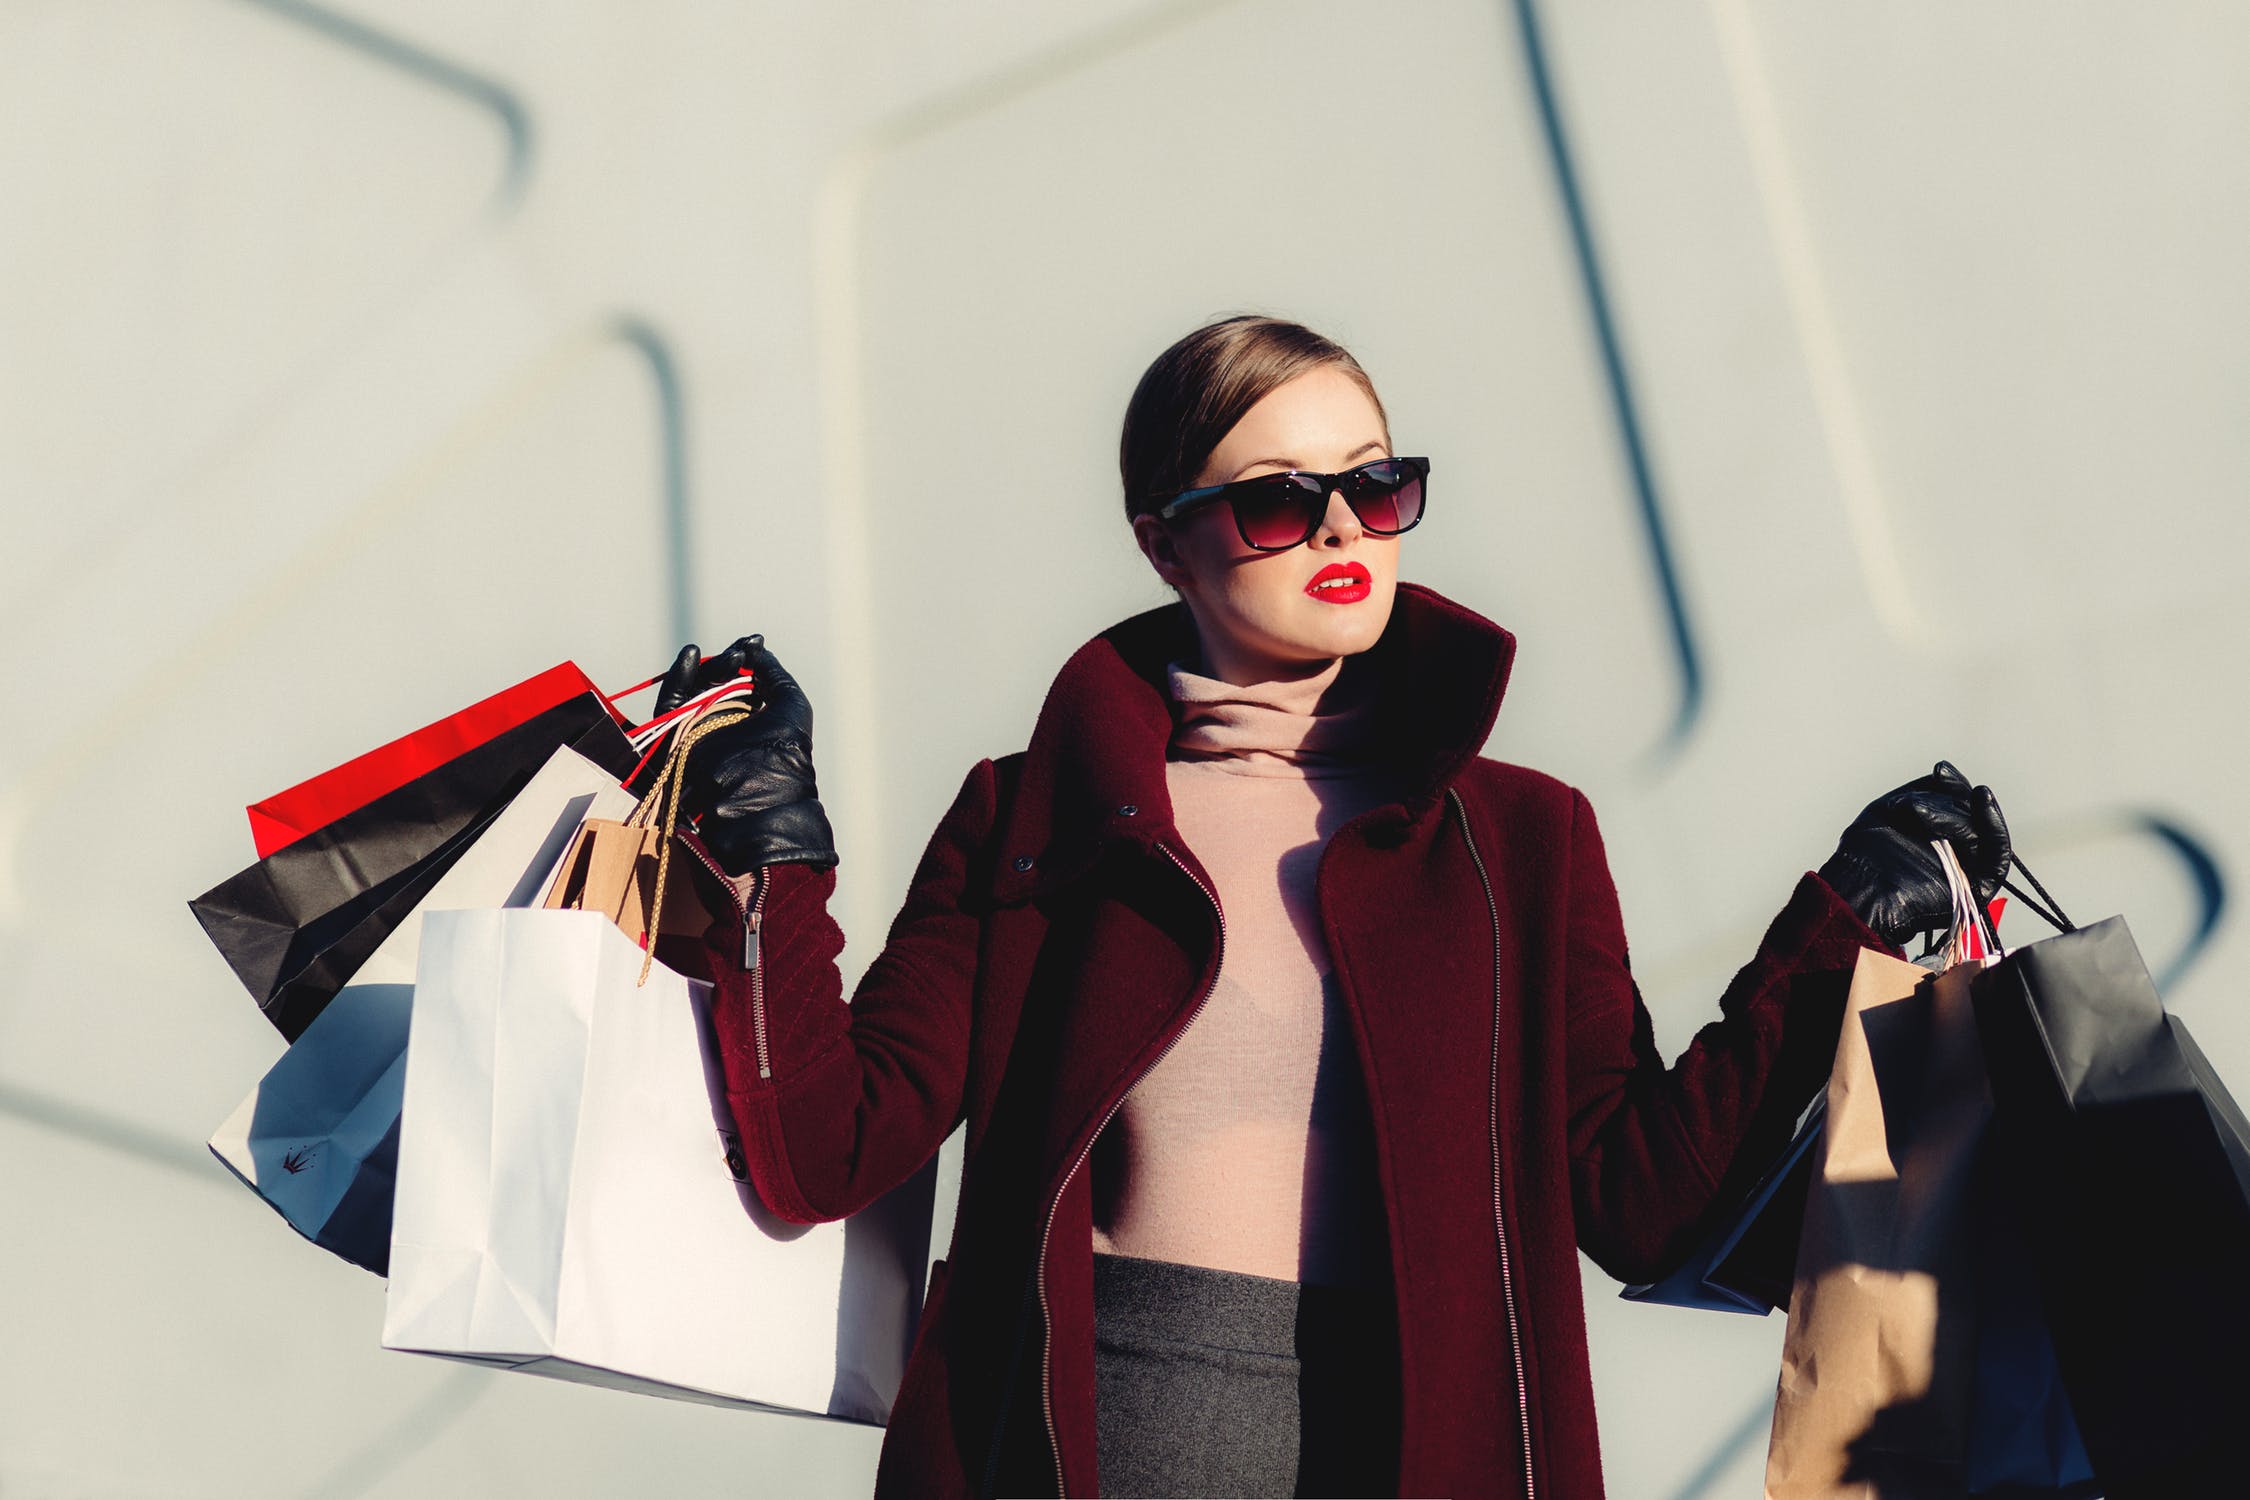 The Top 10 Shopping brands of U.S